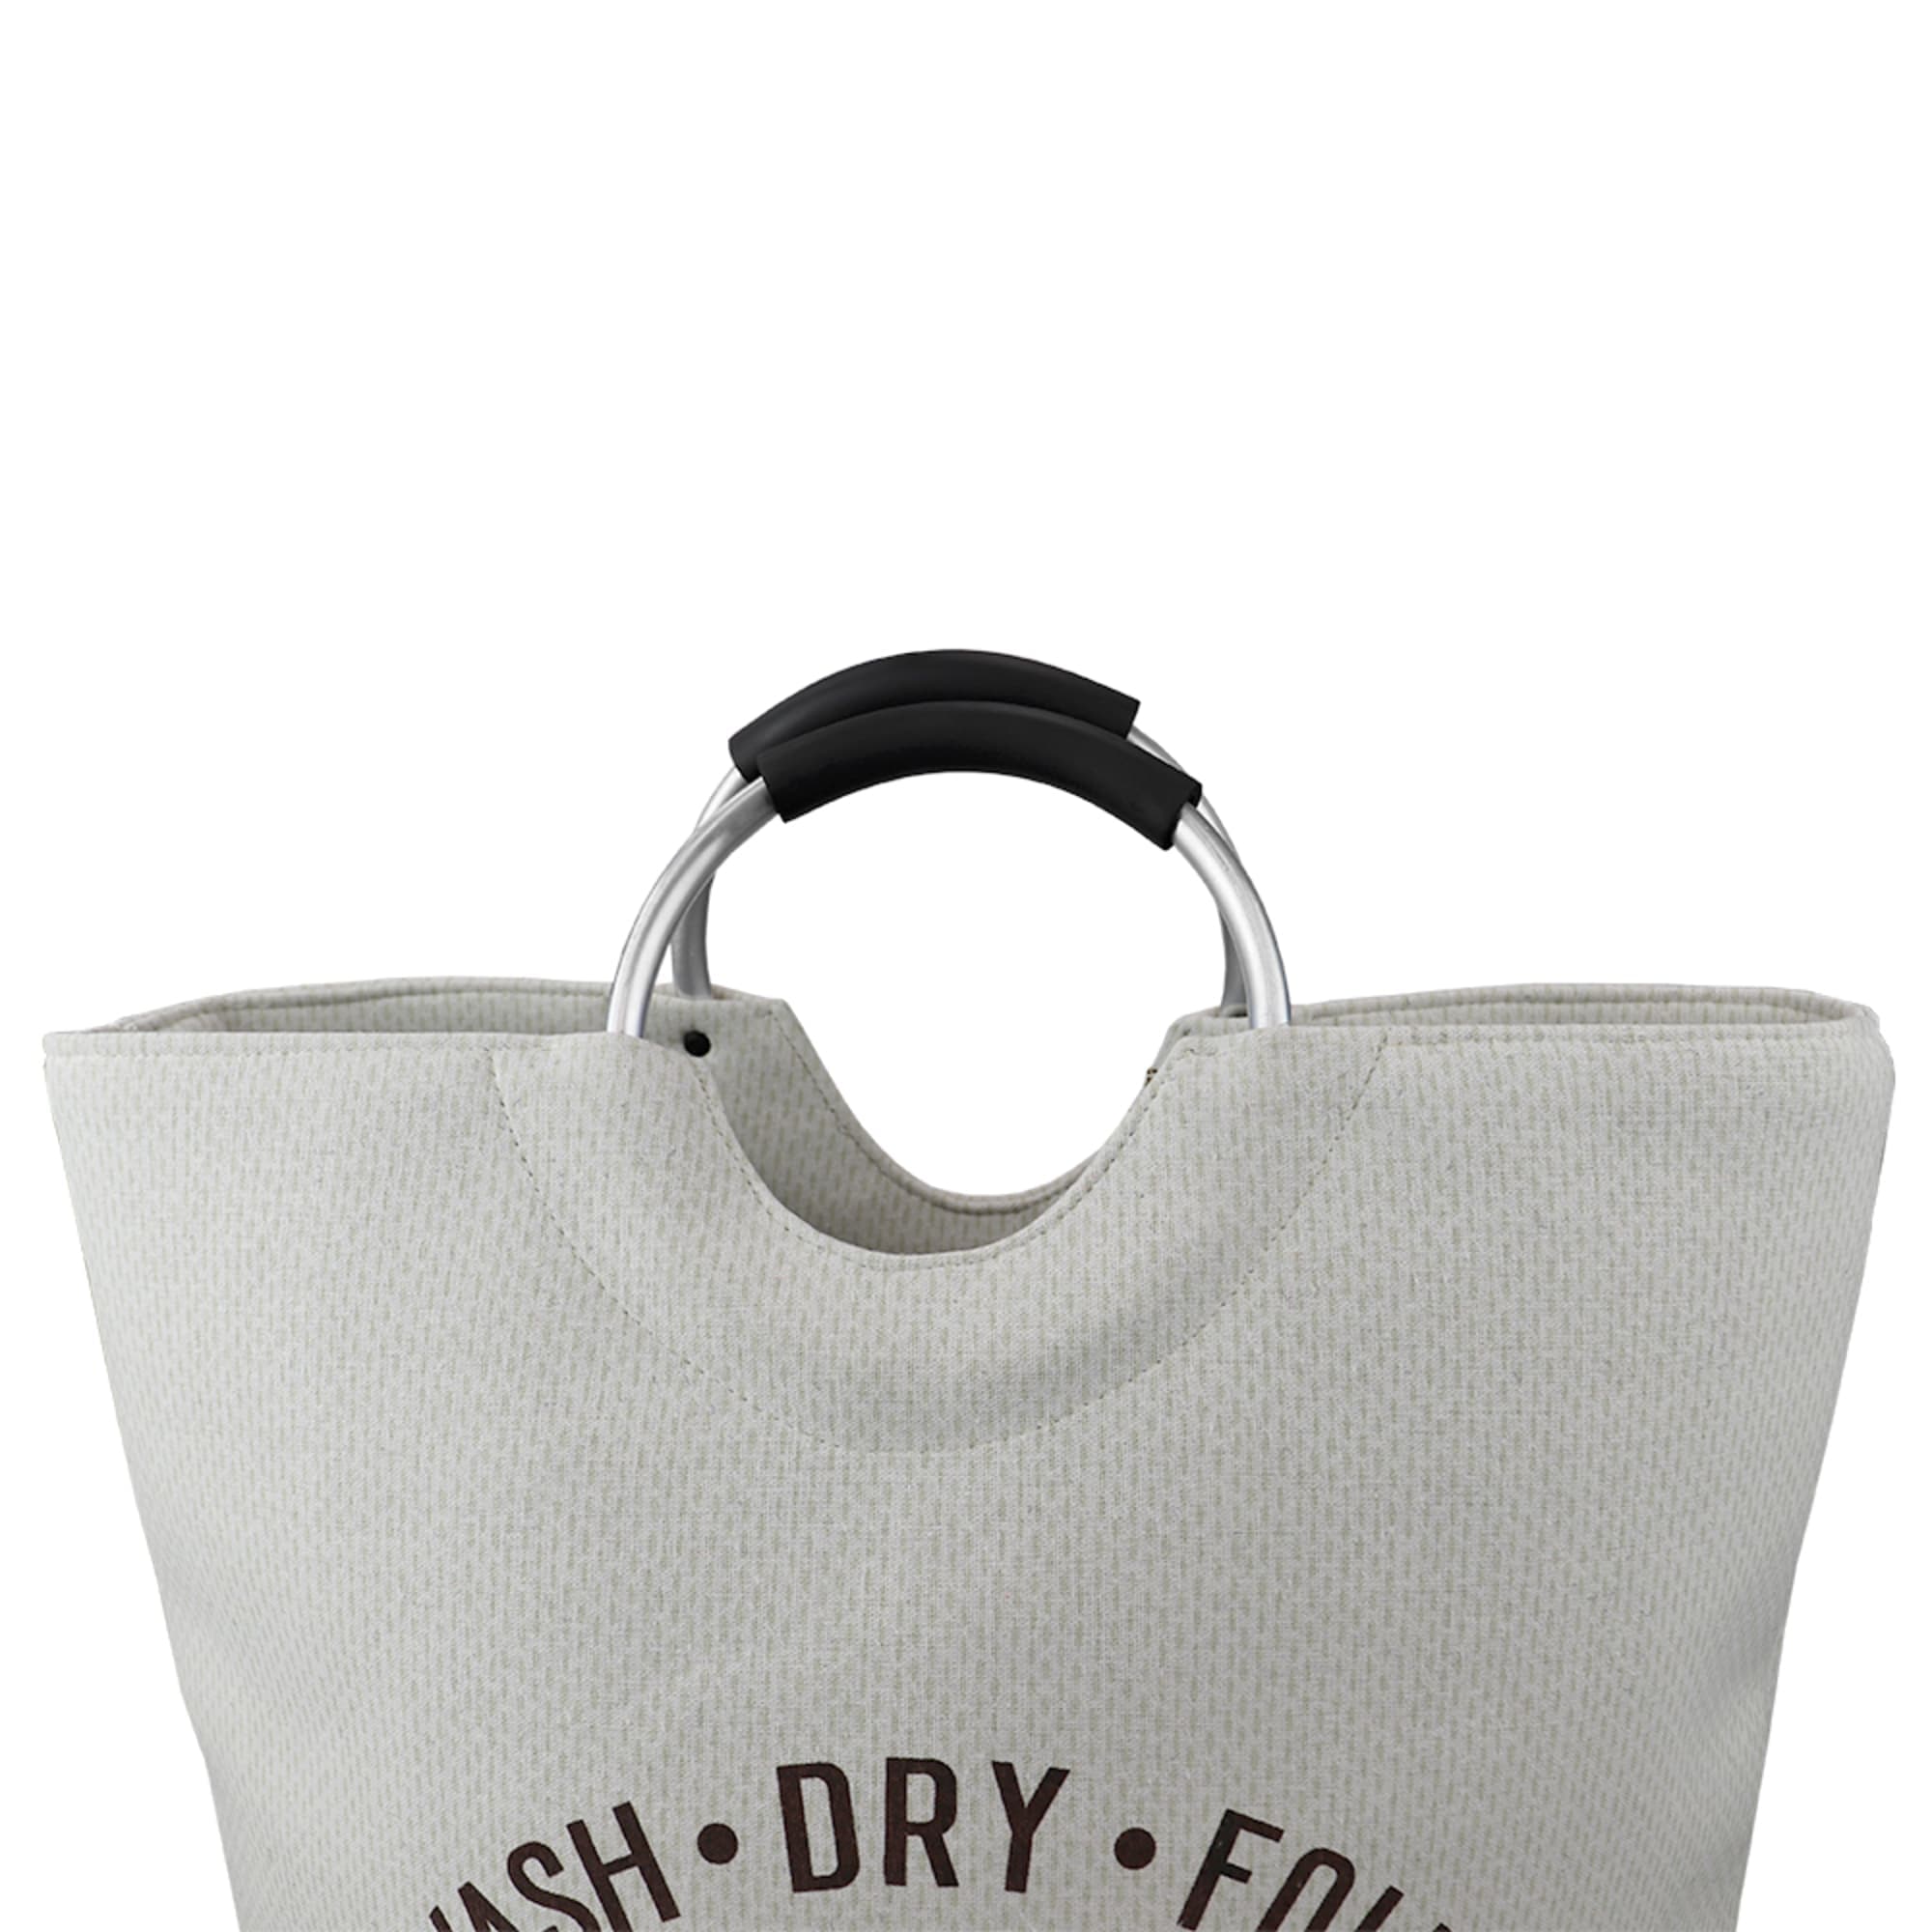 Home Basics Deluxe Service Wash Dry Fold Canvas Laundry Tote with Soft Grip Padded Aluminum Handles, Natural $12 EACH, CASE PACK OF 6